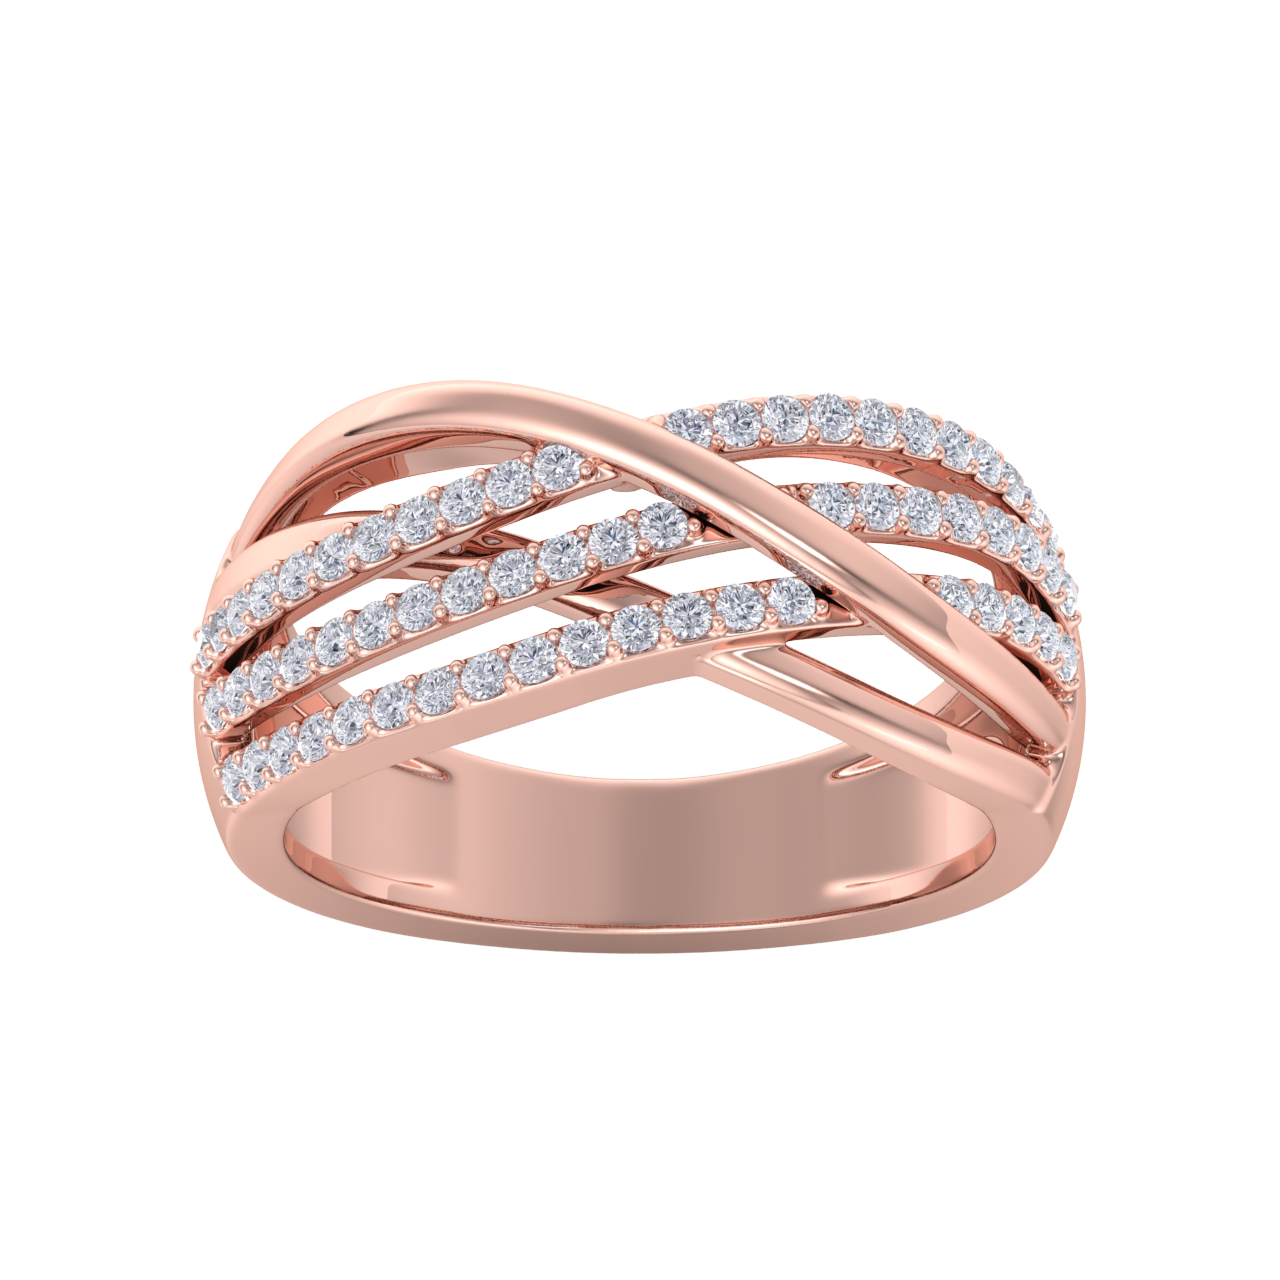 Elegant Diamond ring in rose gold with white diamonds of 0.55 ct in weight
